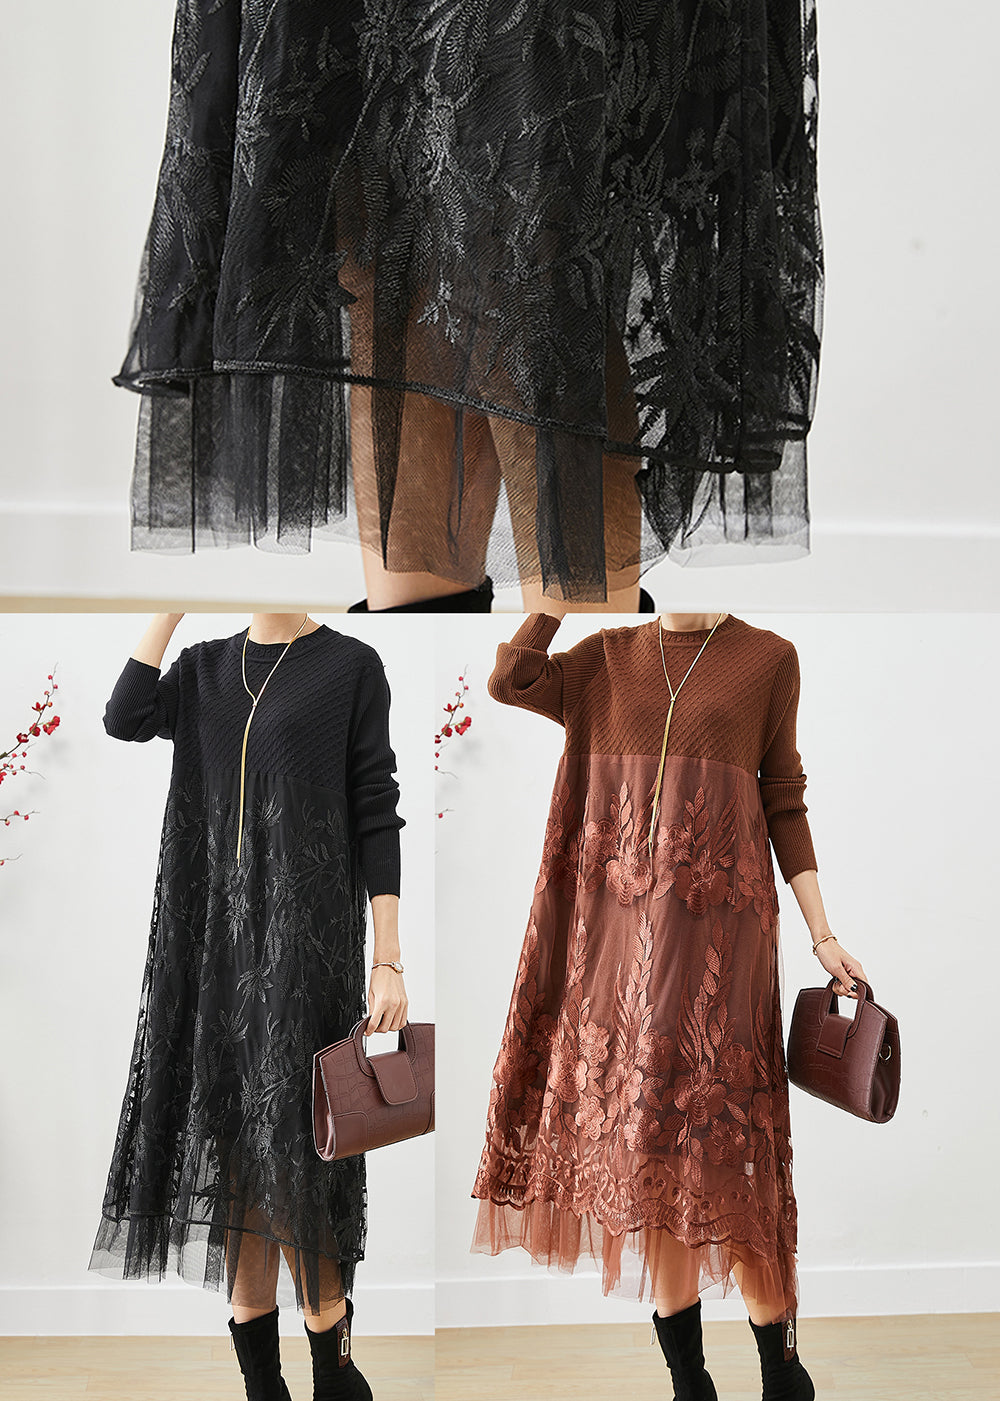 Boho Black Embroideried Tulle Patchwork Knit Long Dress Fall Ada Fashion